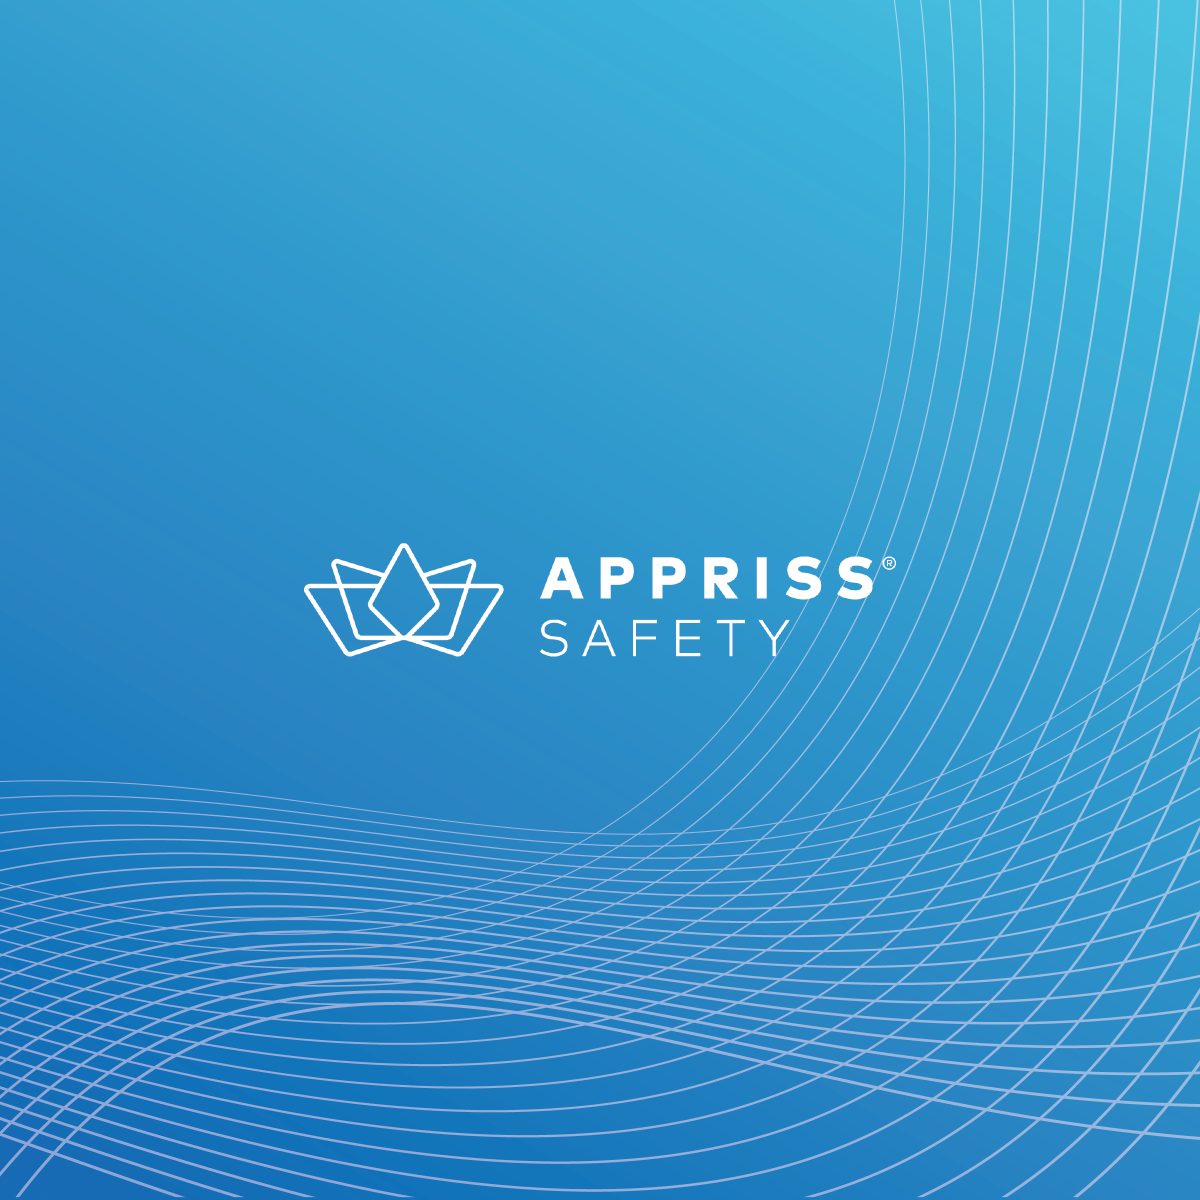 Appriss Logo - Overview